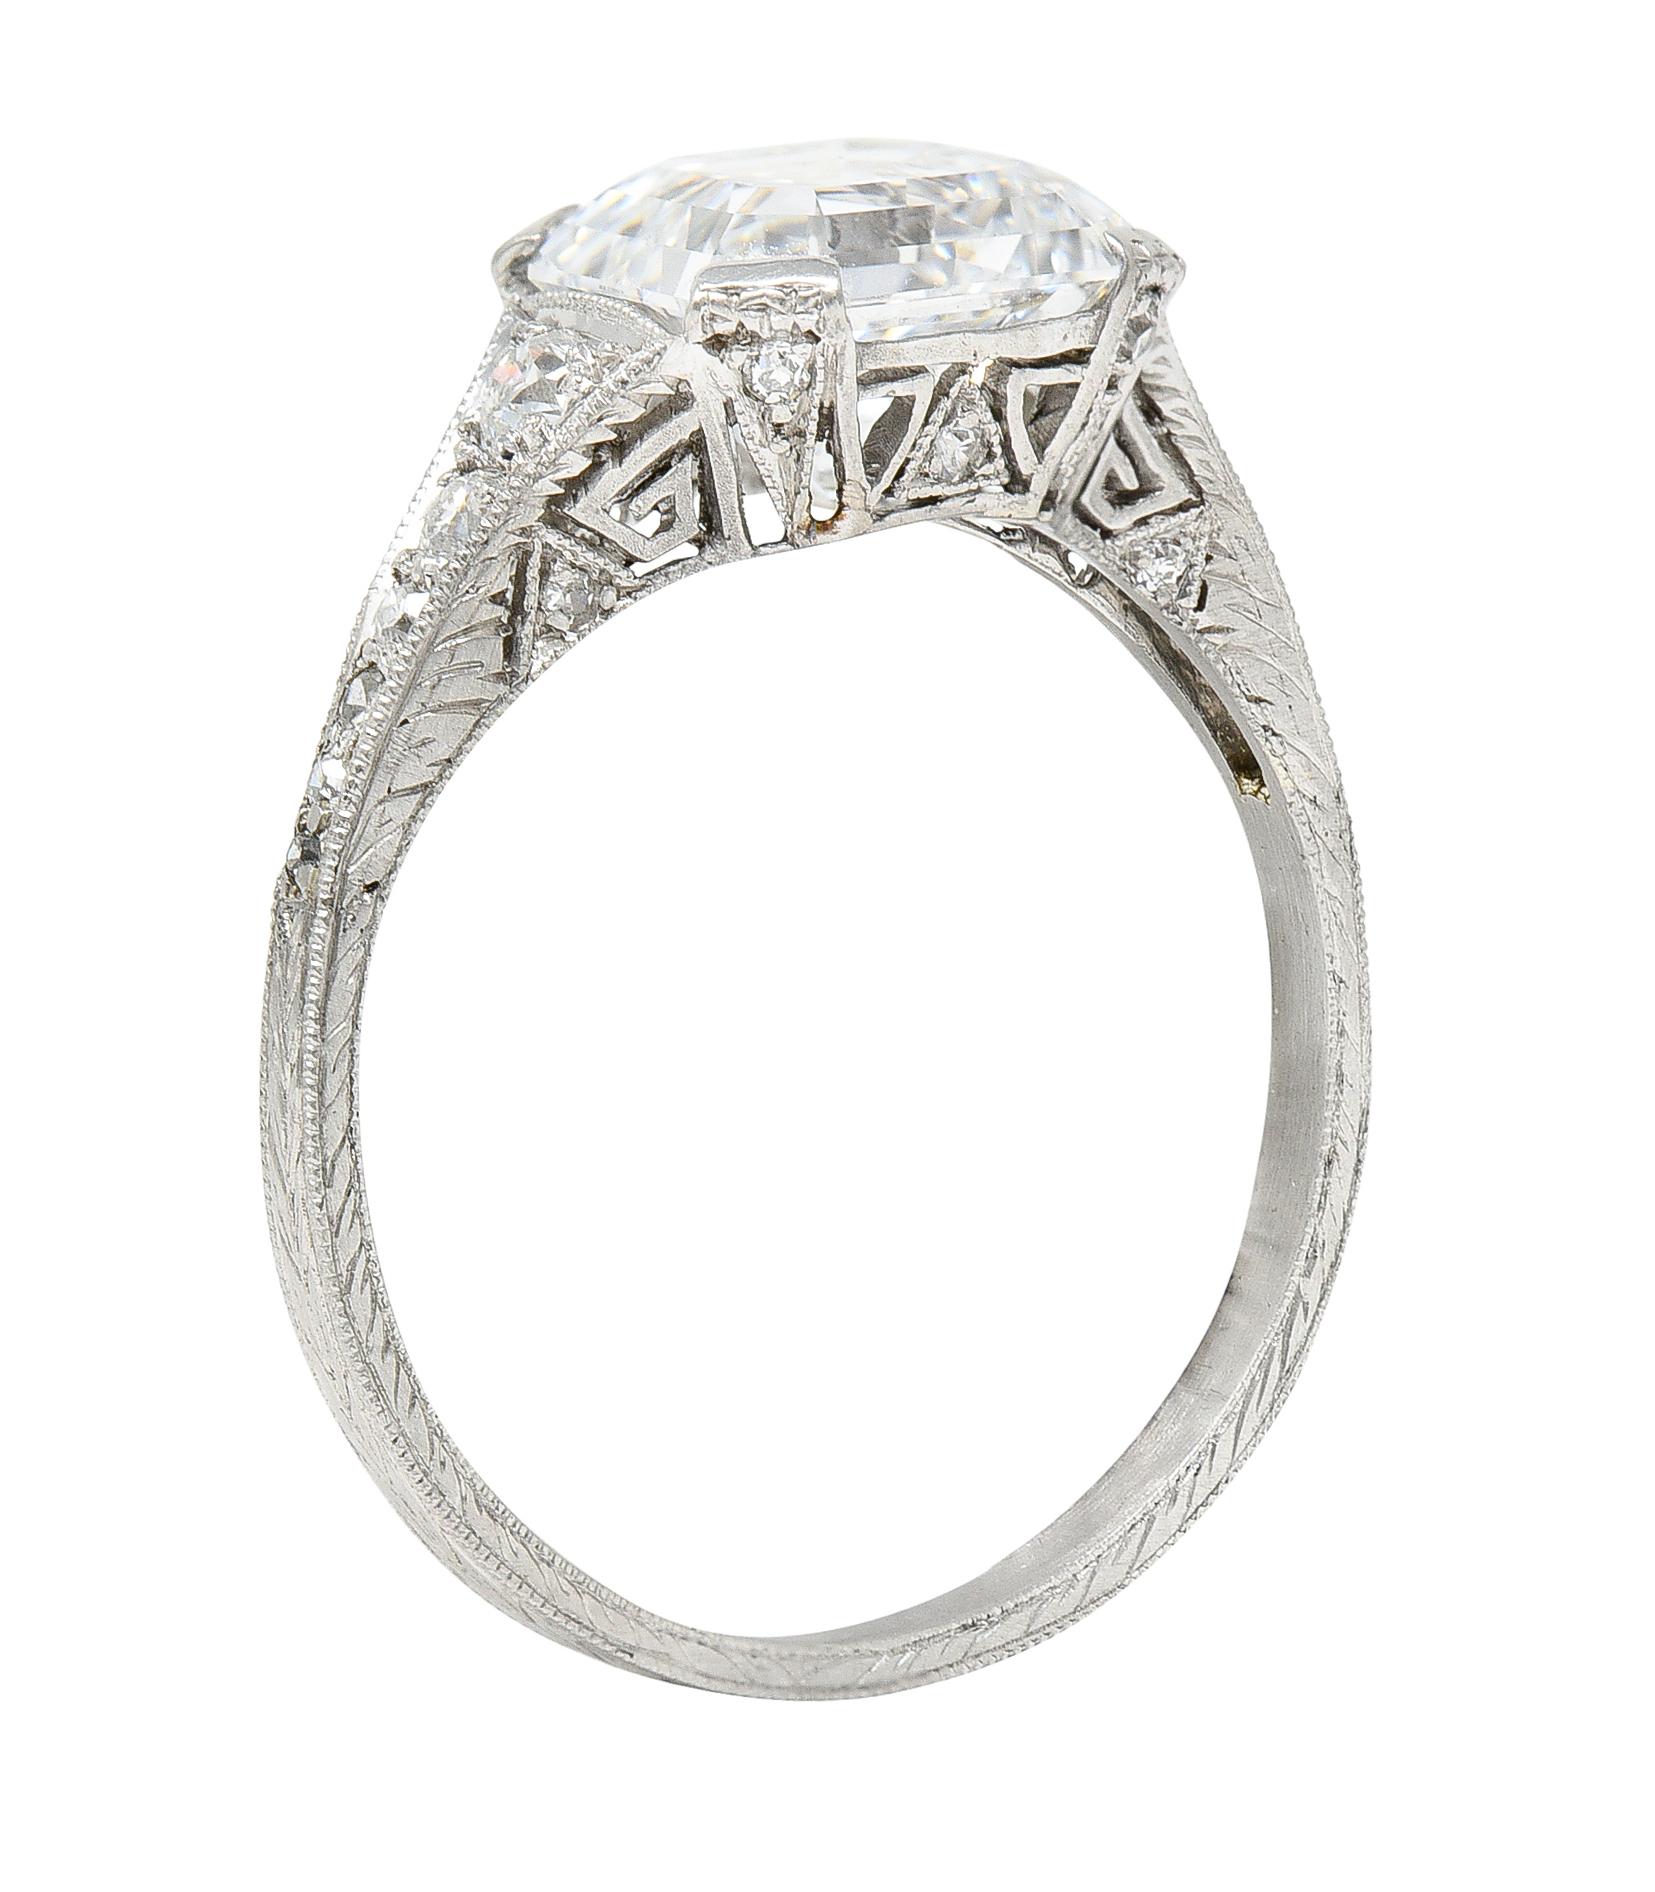 Featuring an asscher cut diamond weighing 2.87 carats - E color with VS2 clarity

Set East to West by wide prongs with a pierced stylized gallery

Depicting a triangle motif flanked by Greek Keys and engraved foliate fully around shank

Accented by